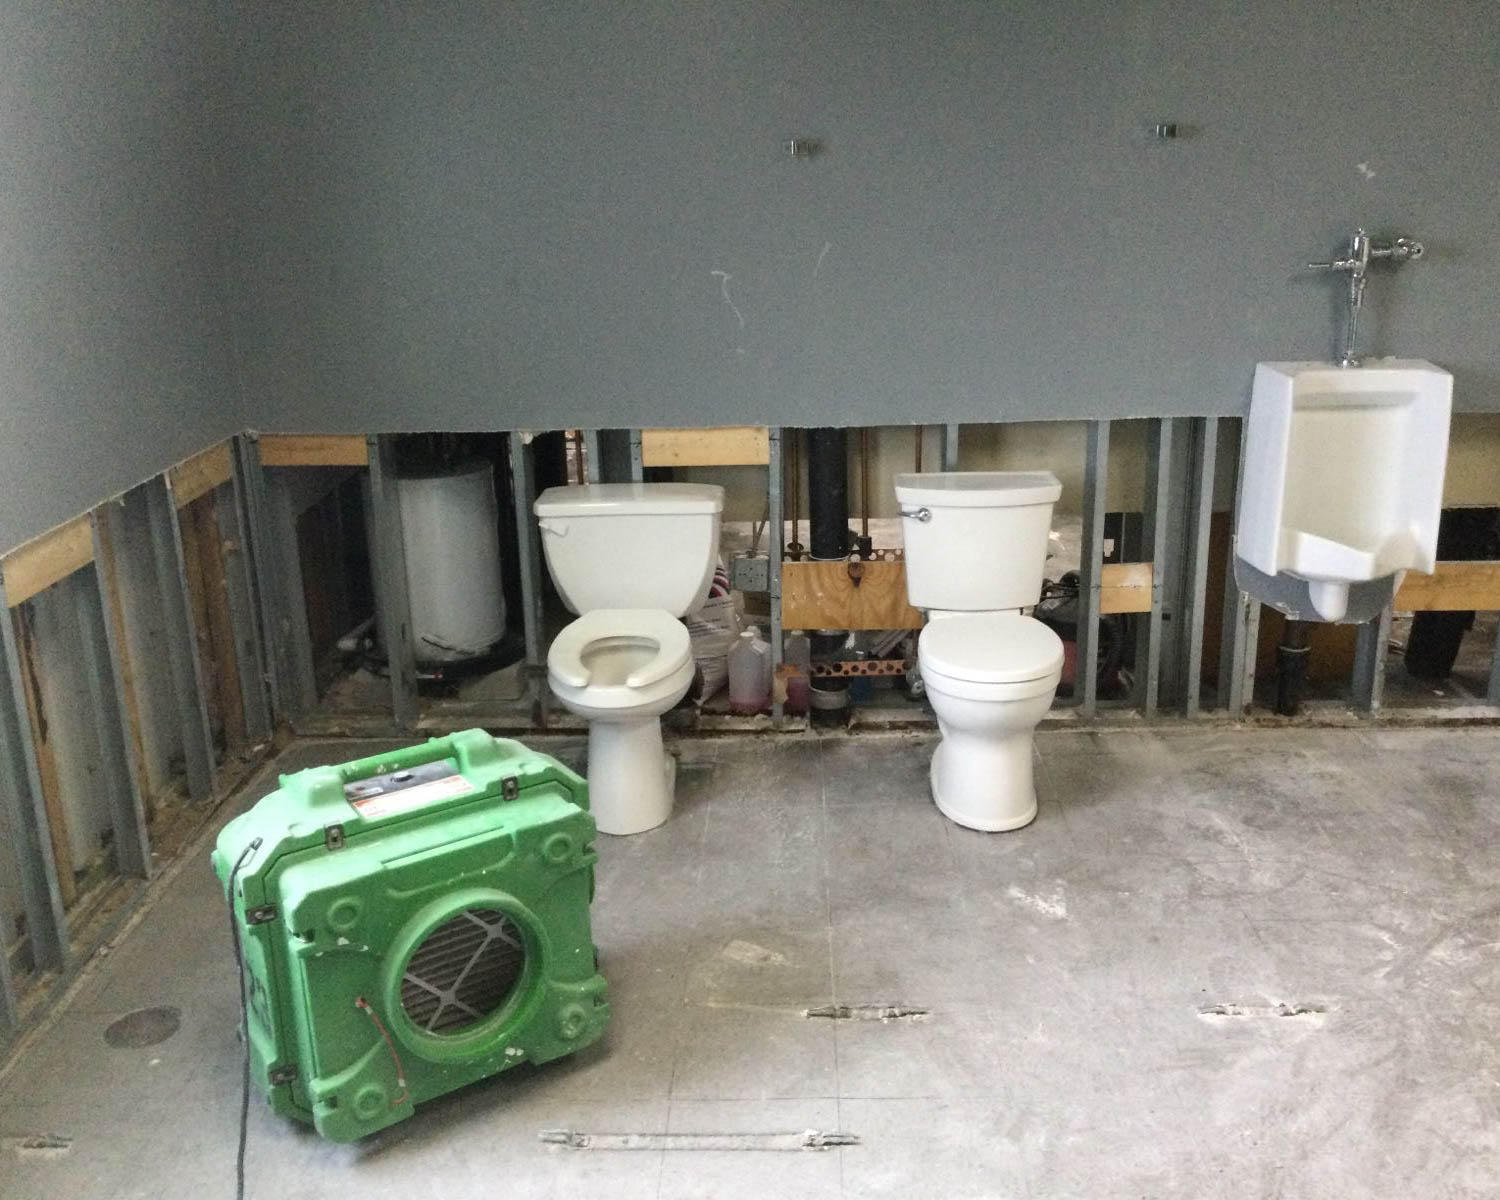 A commercial bathroom became flooded after severe weather in the area. We created some flood cuts to allow proper drying and air flow. Our industry-grade air mover is placed strategically for the best air flow possible.